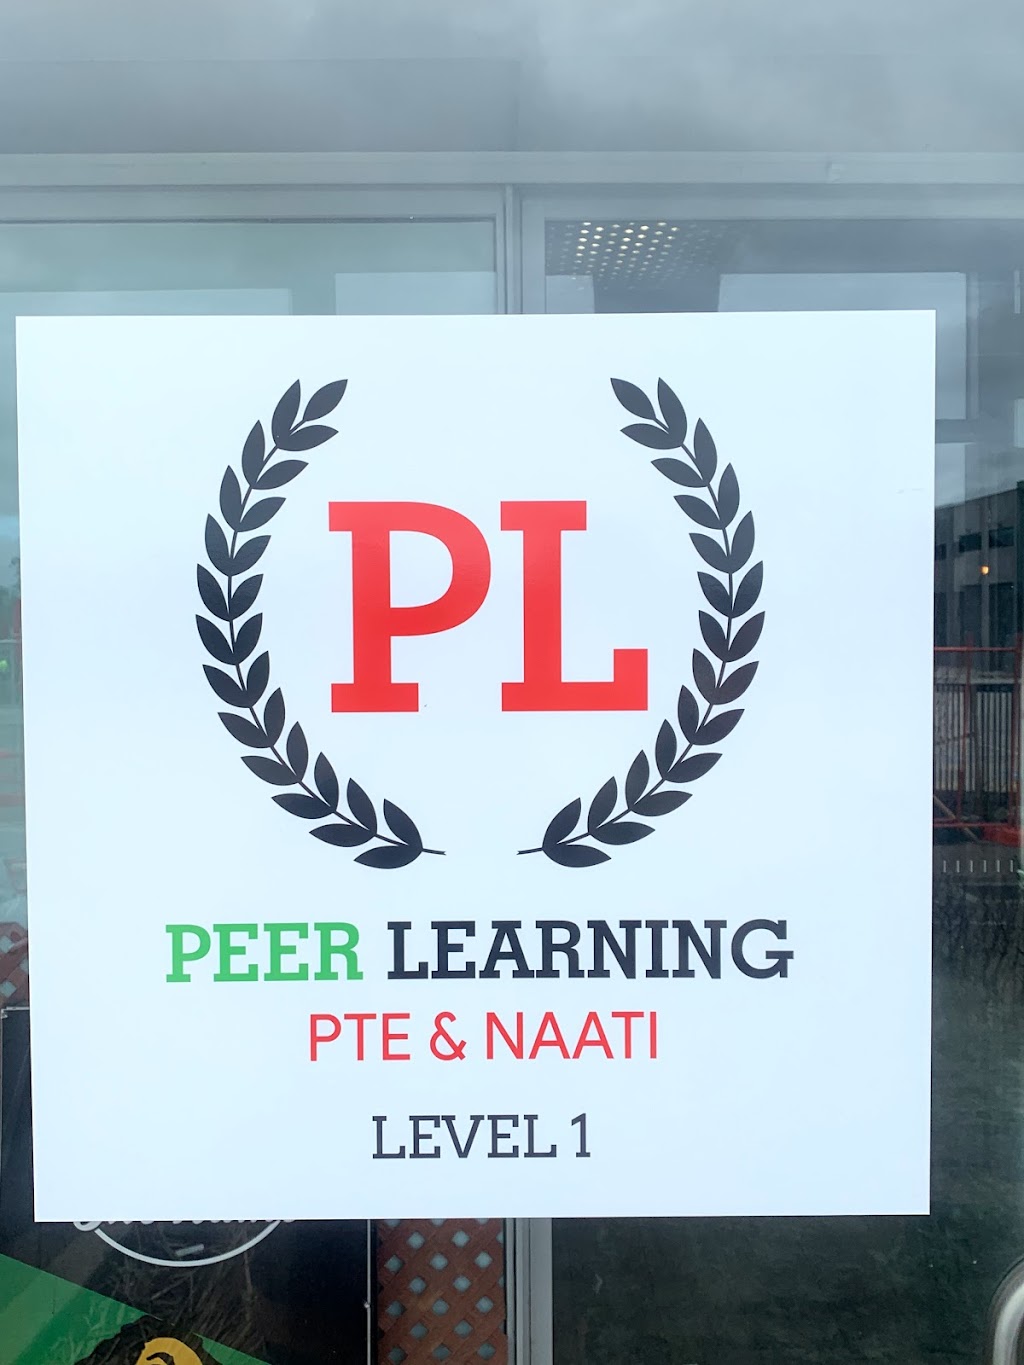 Peer Learning PTE and NAATI |  | Level 1/42 Wallace Ave, Point Cook VIC 3030, Australia | 0470552056 OR +61 470 552 056